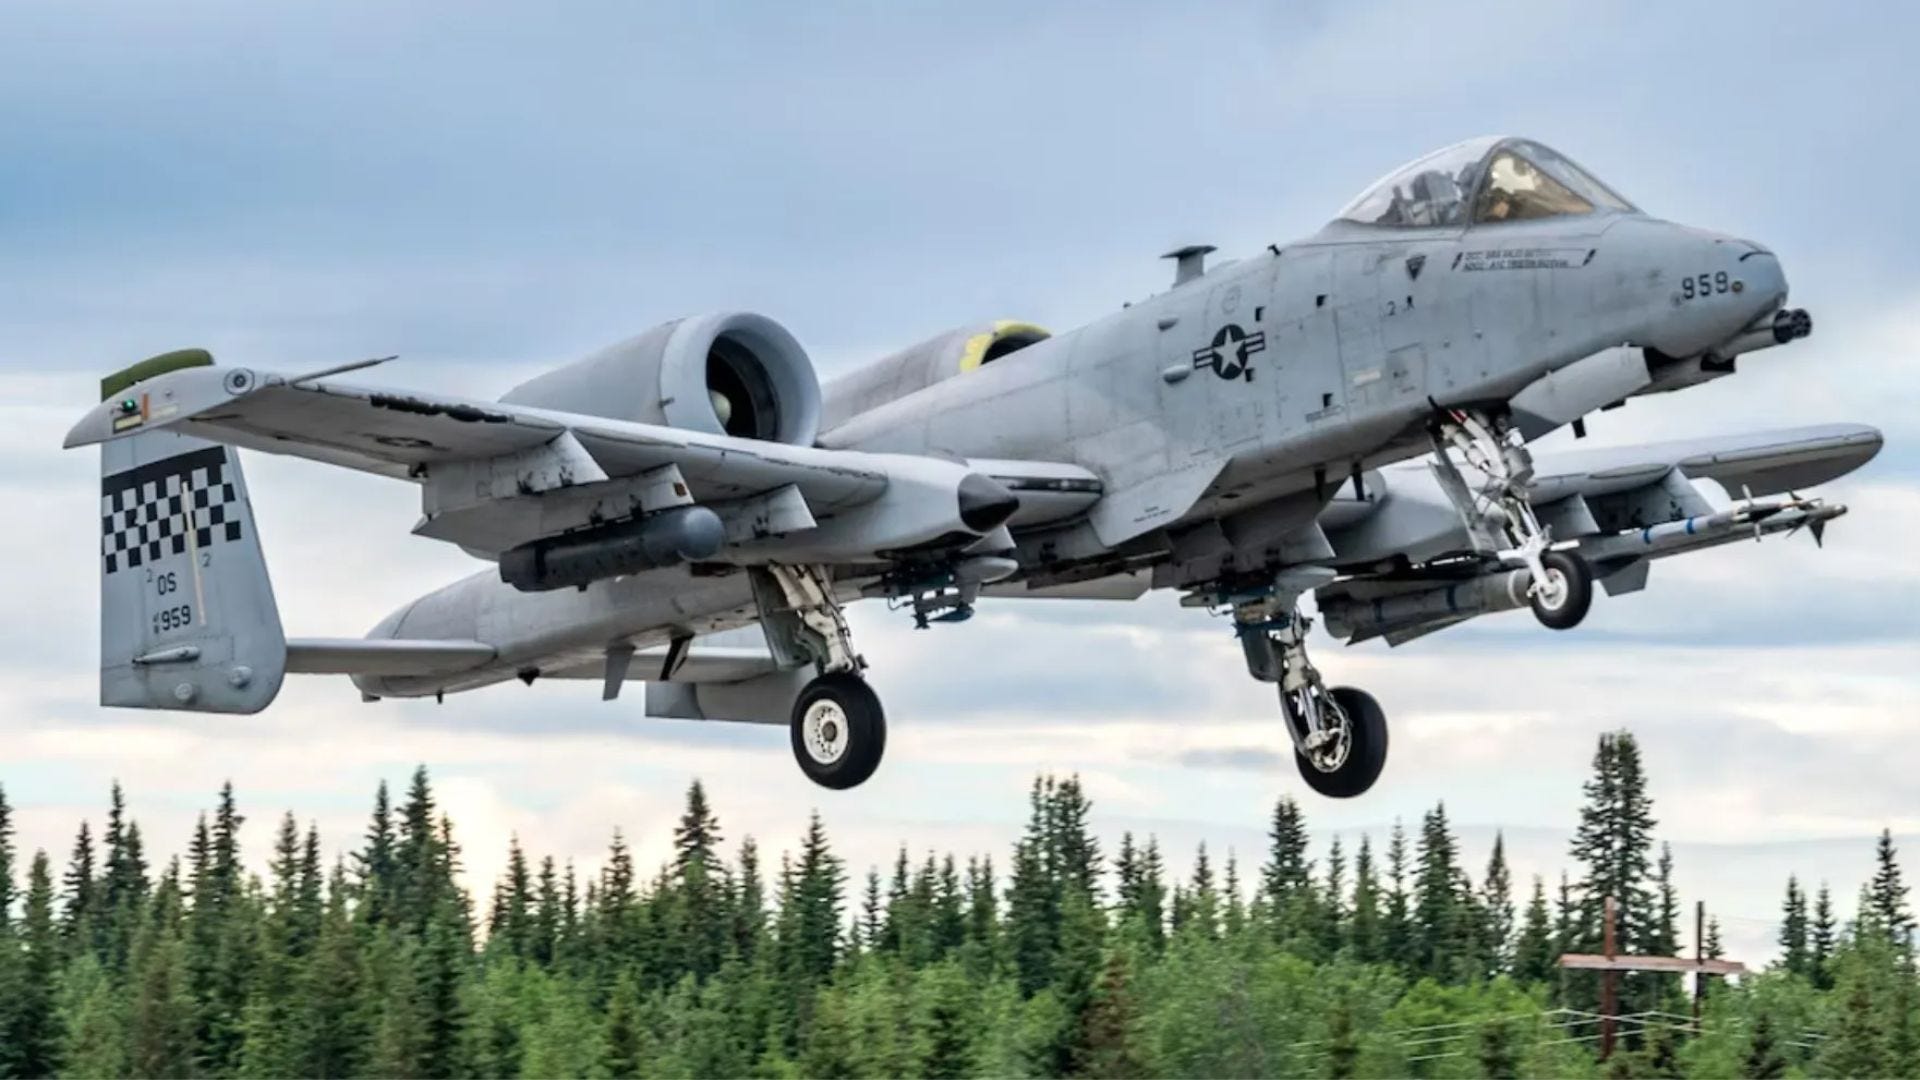 Thunder in the Skies: The Legendary A-10 Warthog Unleashed